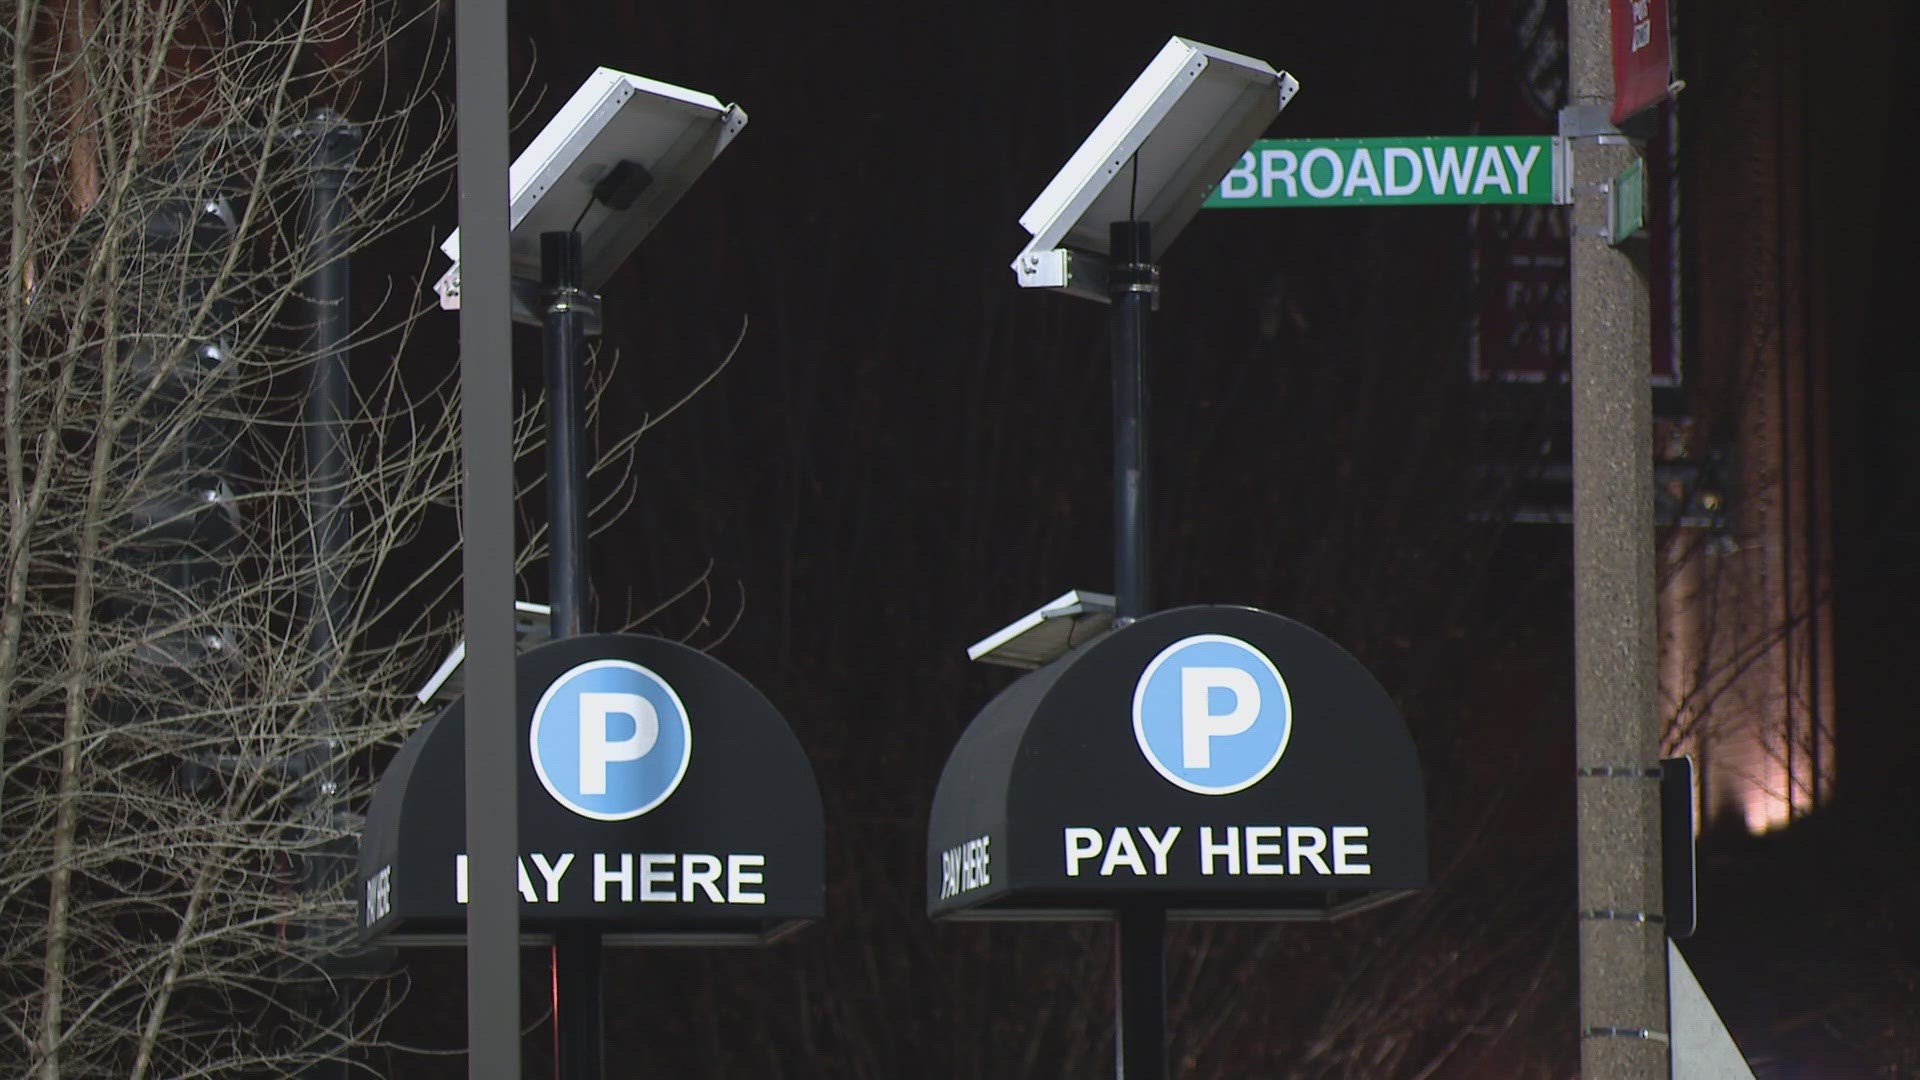 Car break-ins have plagued downtown St. Louis residents and visitors who park on surface lots. A solution is in the works to curb the vandalism and mischief.